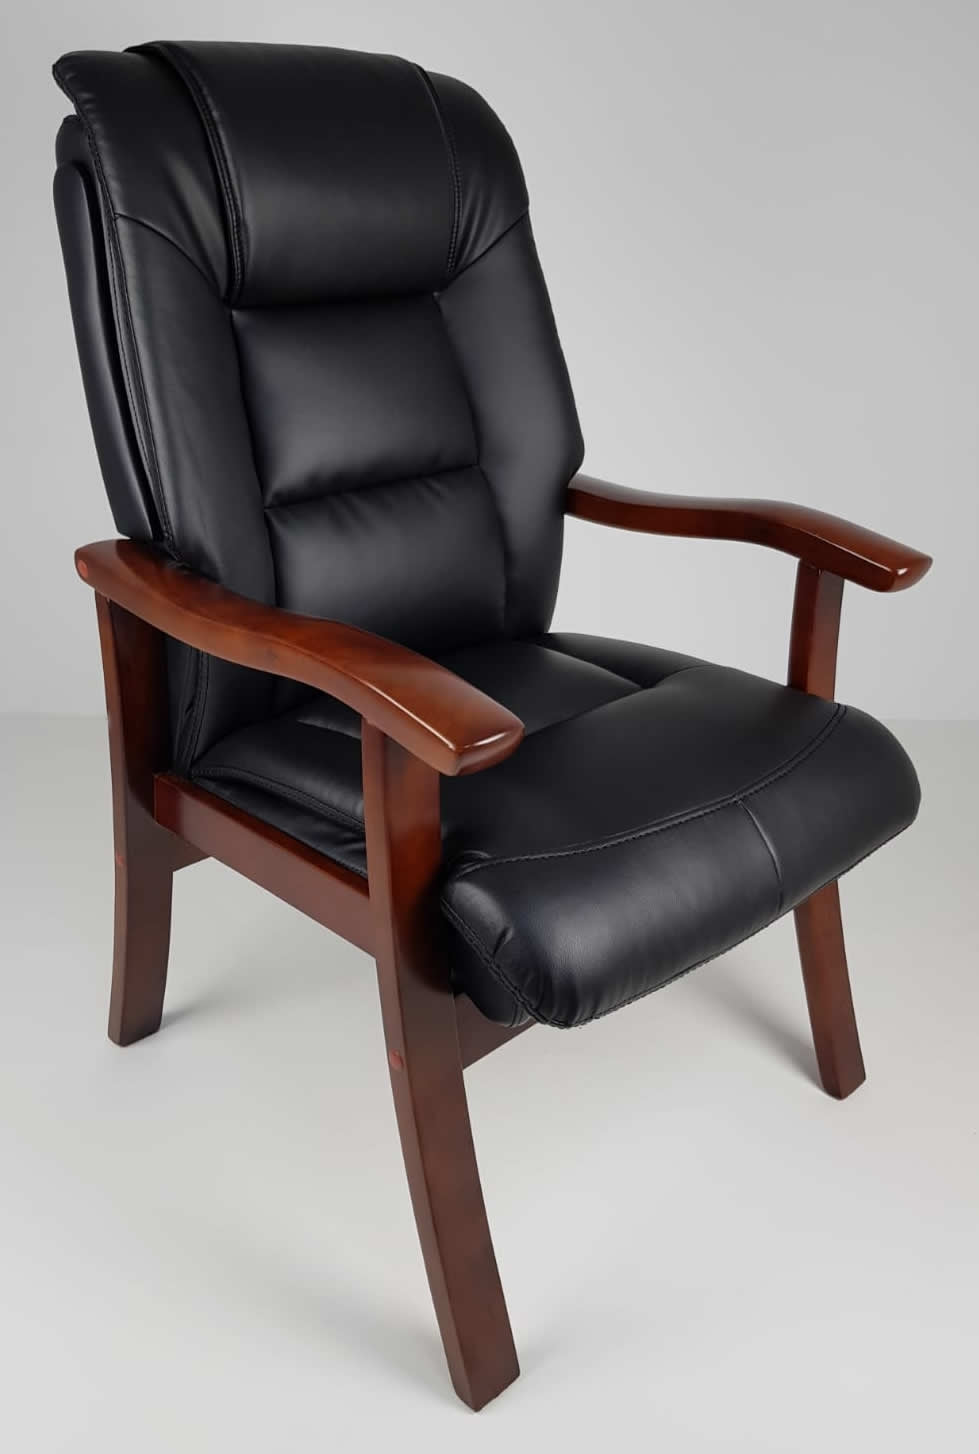 Visitor Chair Black Leather with Walnut Arms - CHA-1830C North Yorkshire